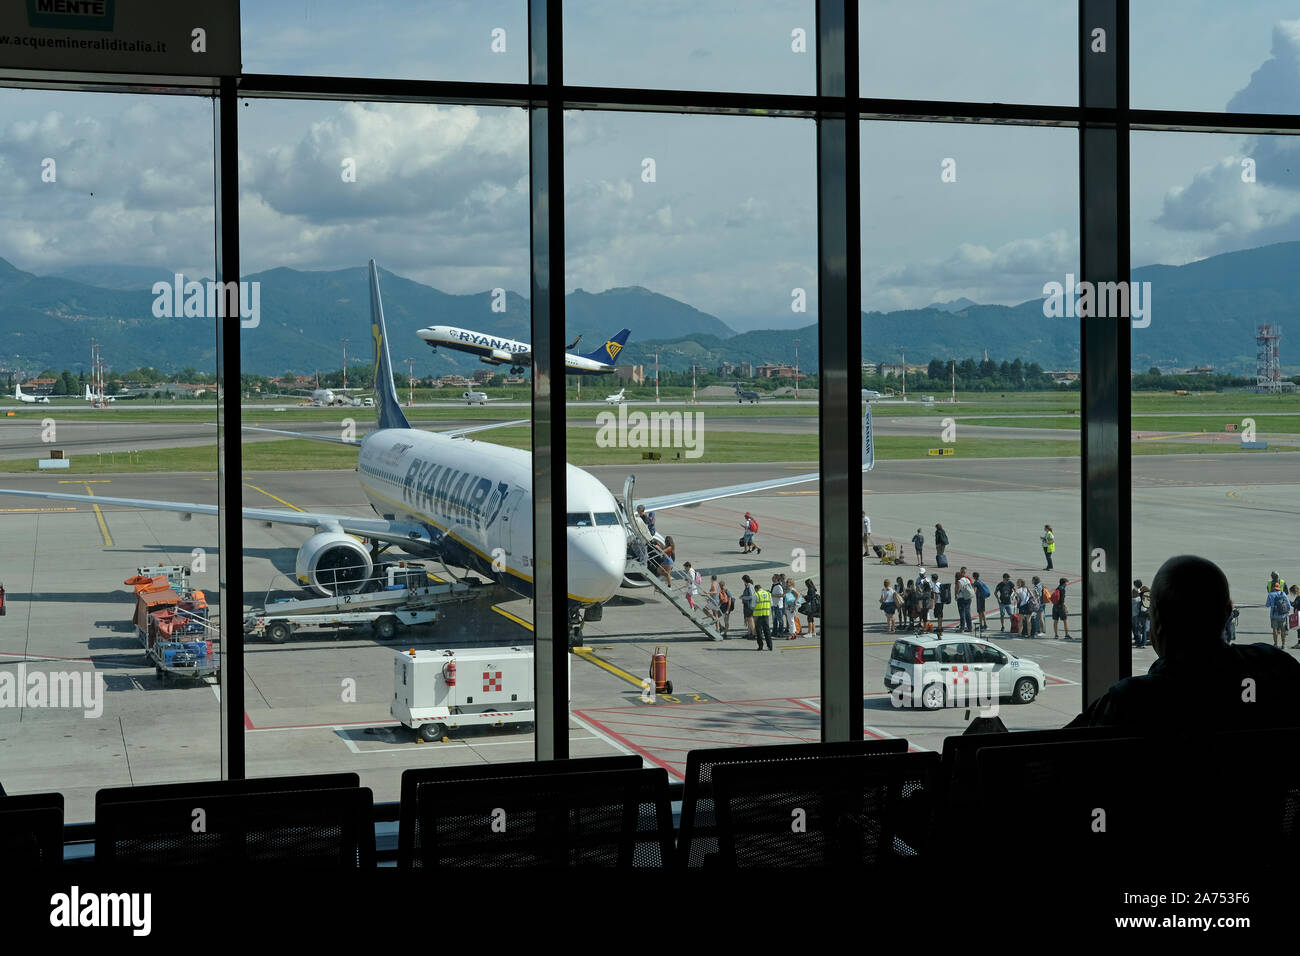 Passengers boarding a Ryanair plane while another plane takes off Stock Photo